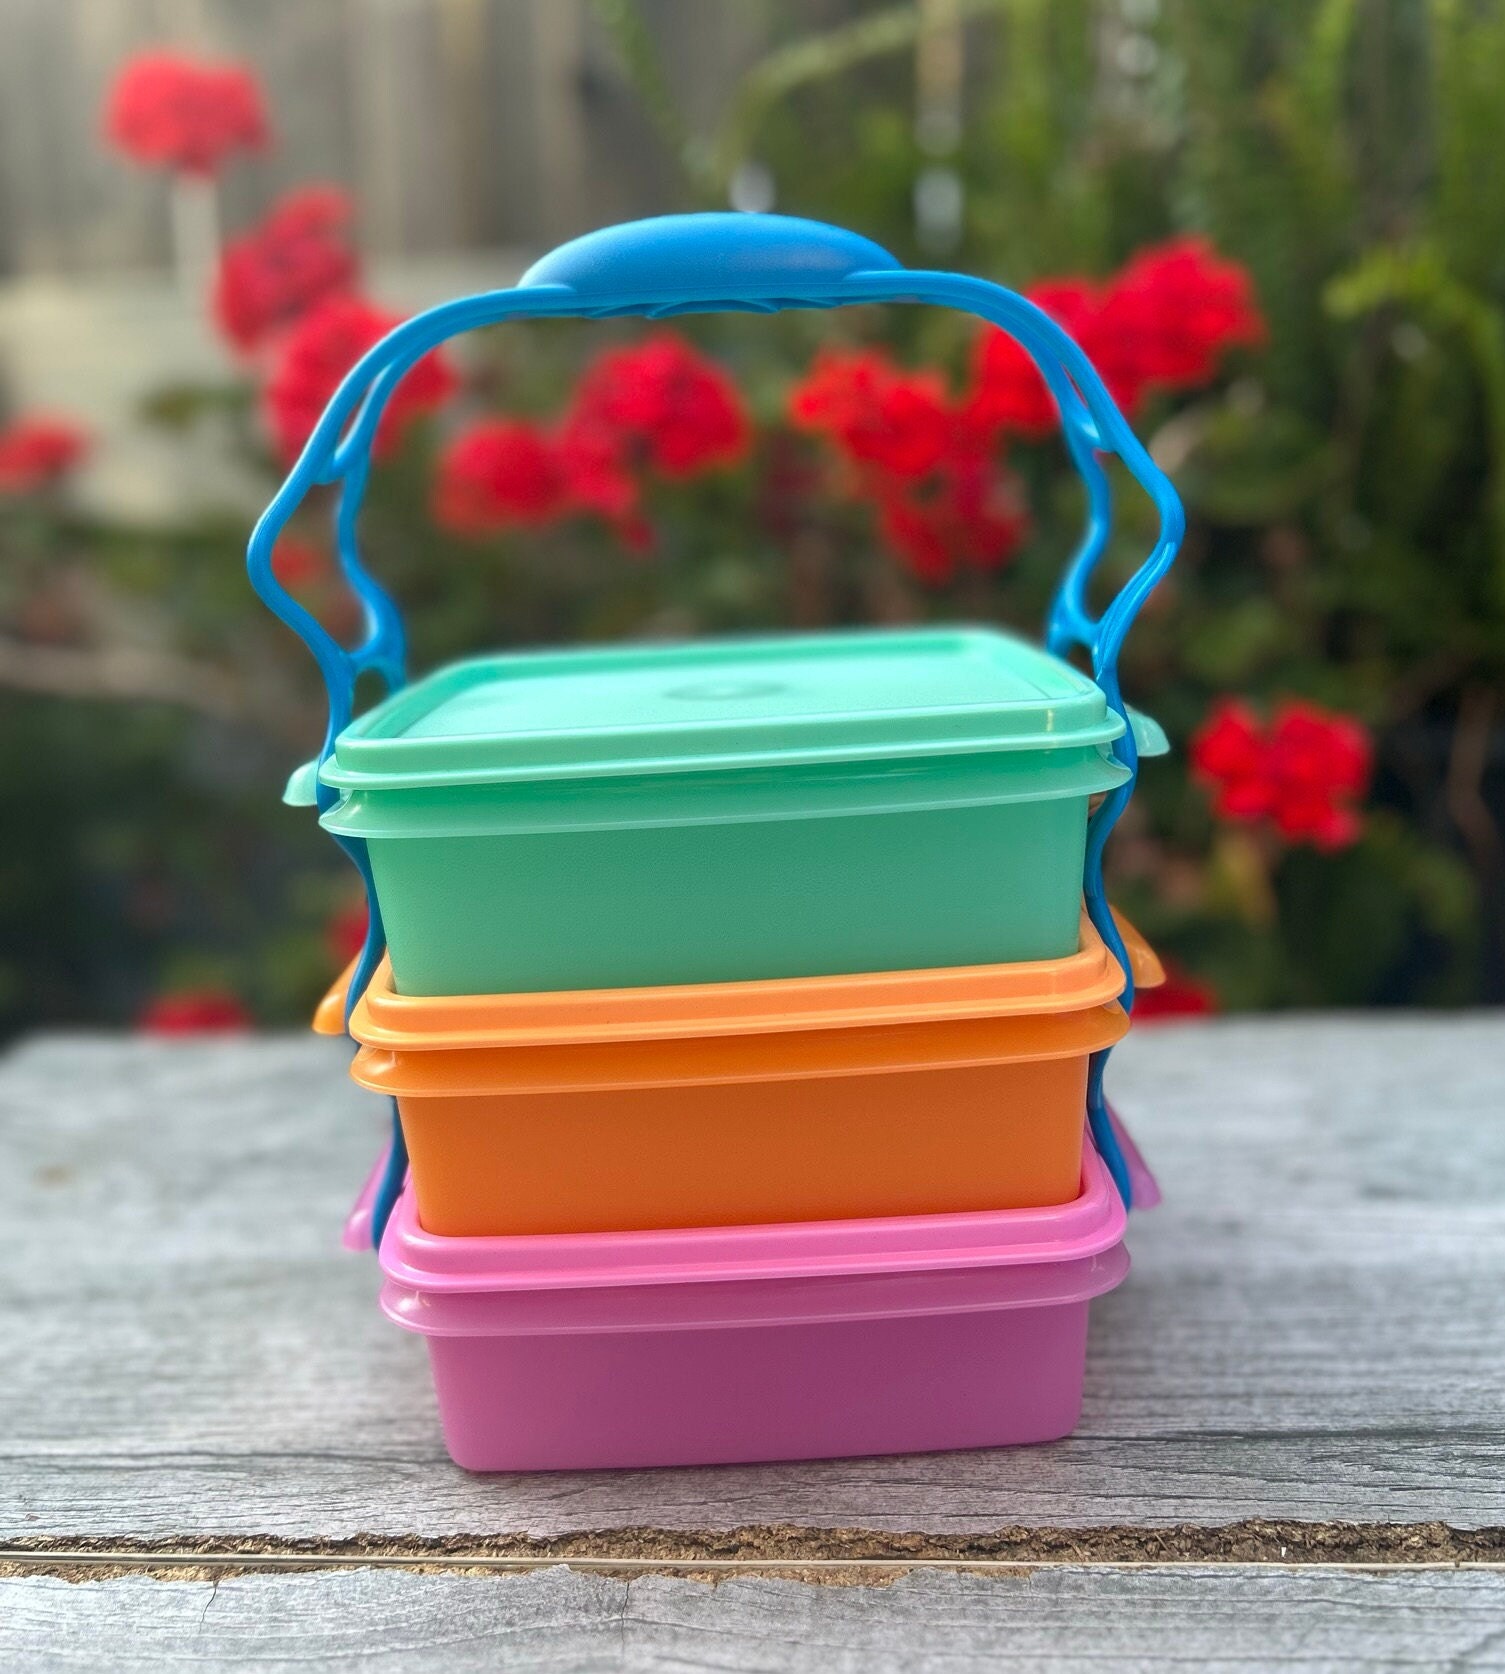 New TUPPERWARE Square Away The Original Sandwich Container Set